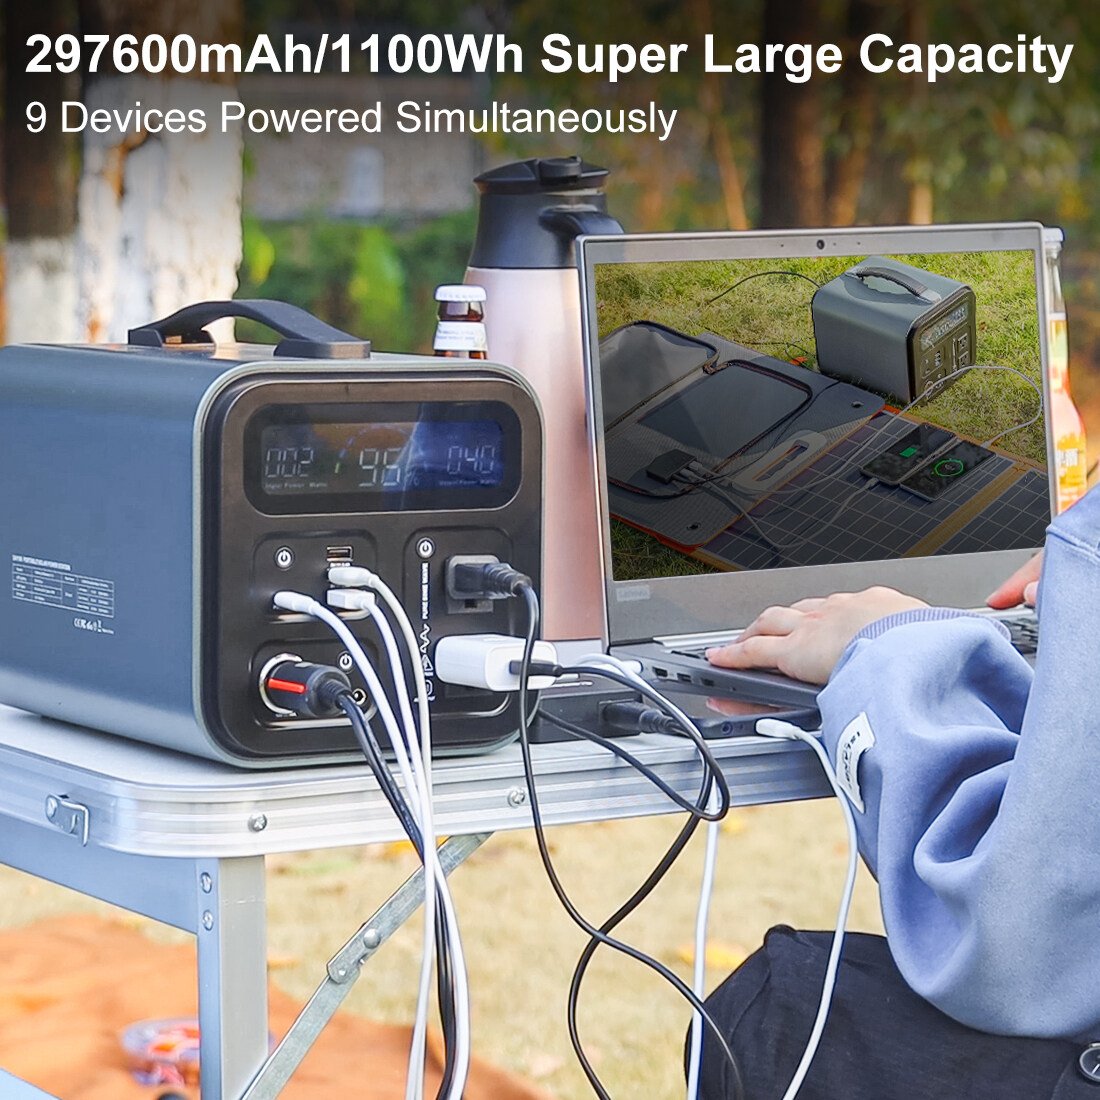 GoFort 1100Wh Portable Power Station 1200W (Peak 2000W) Solar Generator With 110V AC Outlets QC3.0 & Type C 45W Backup Battery Pack New